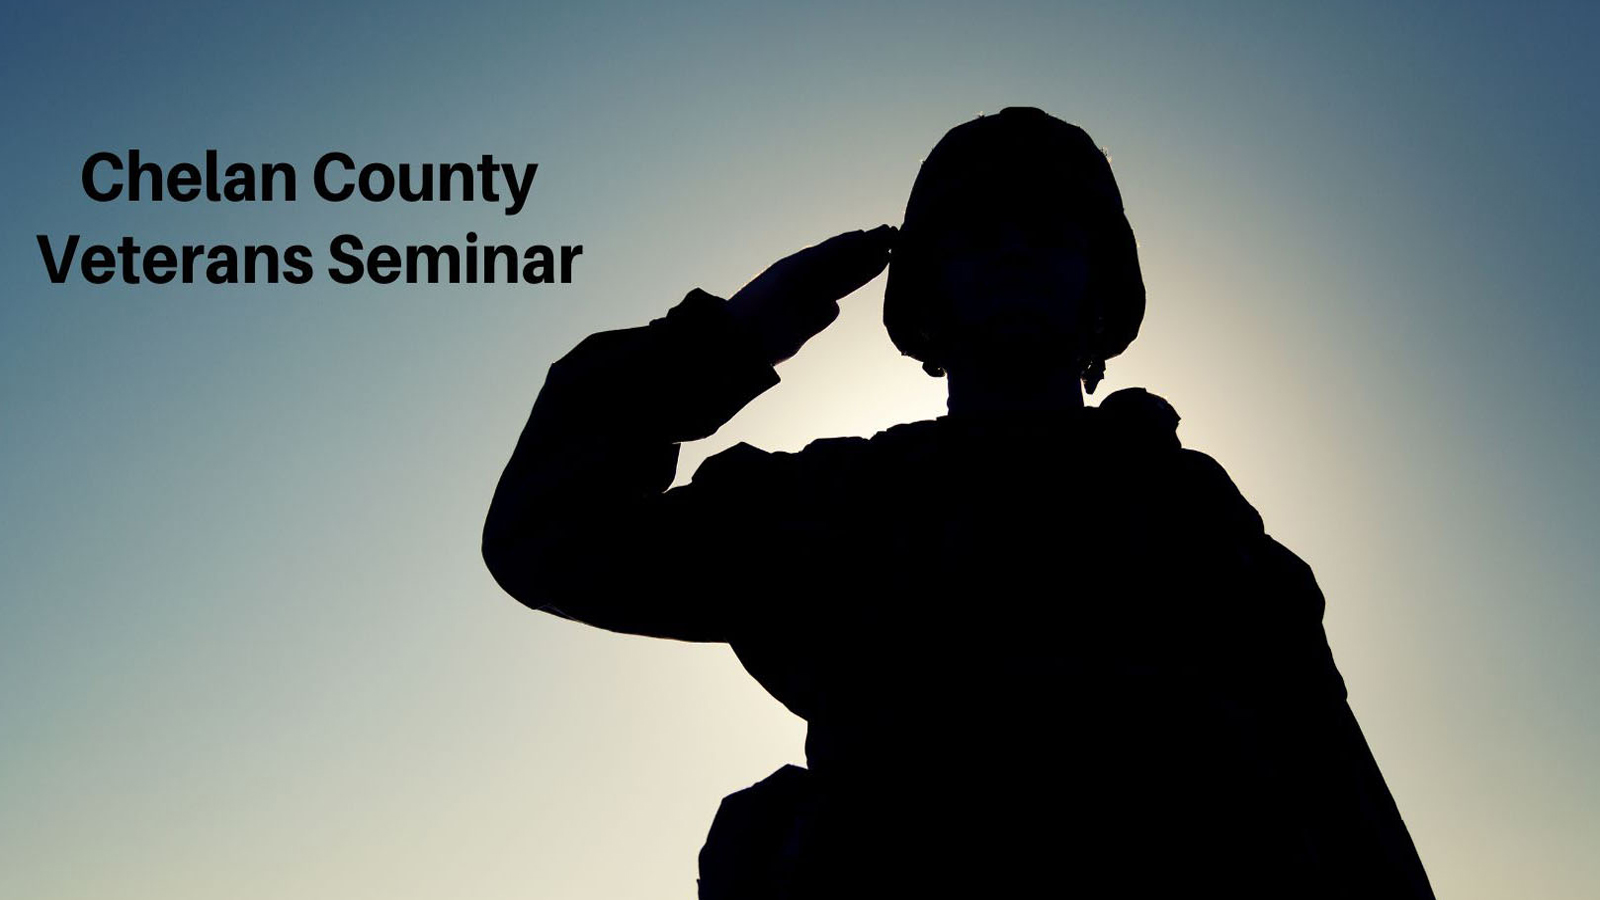 Area vets invited to Sept. 29 seminar to learn about benefits, services